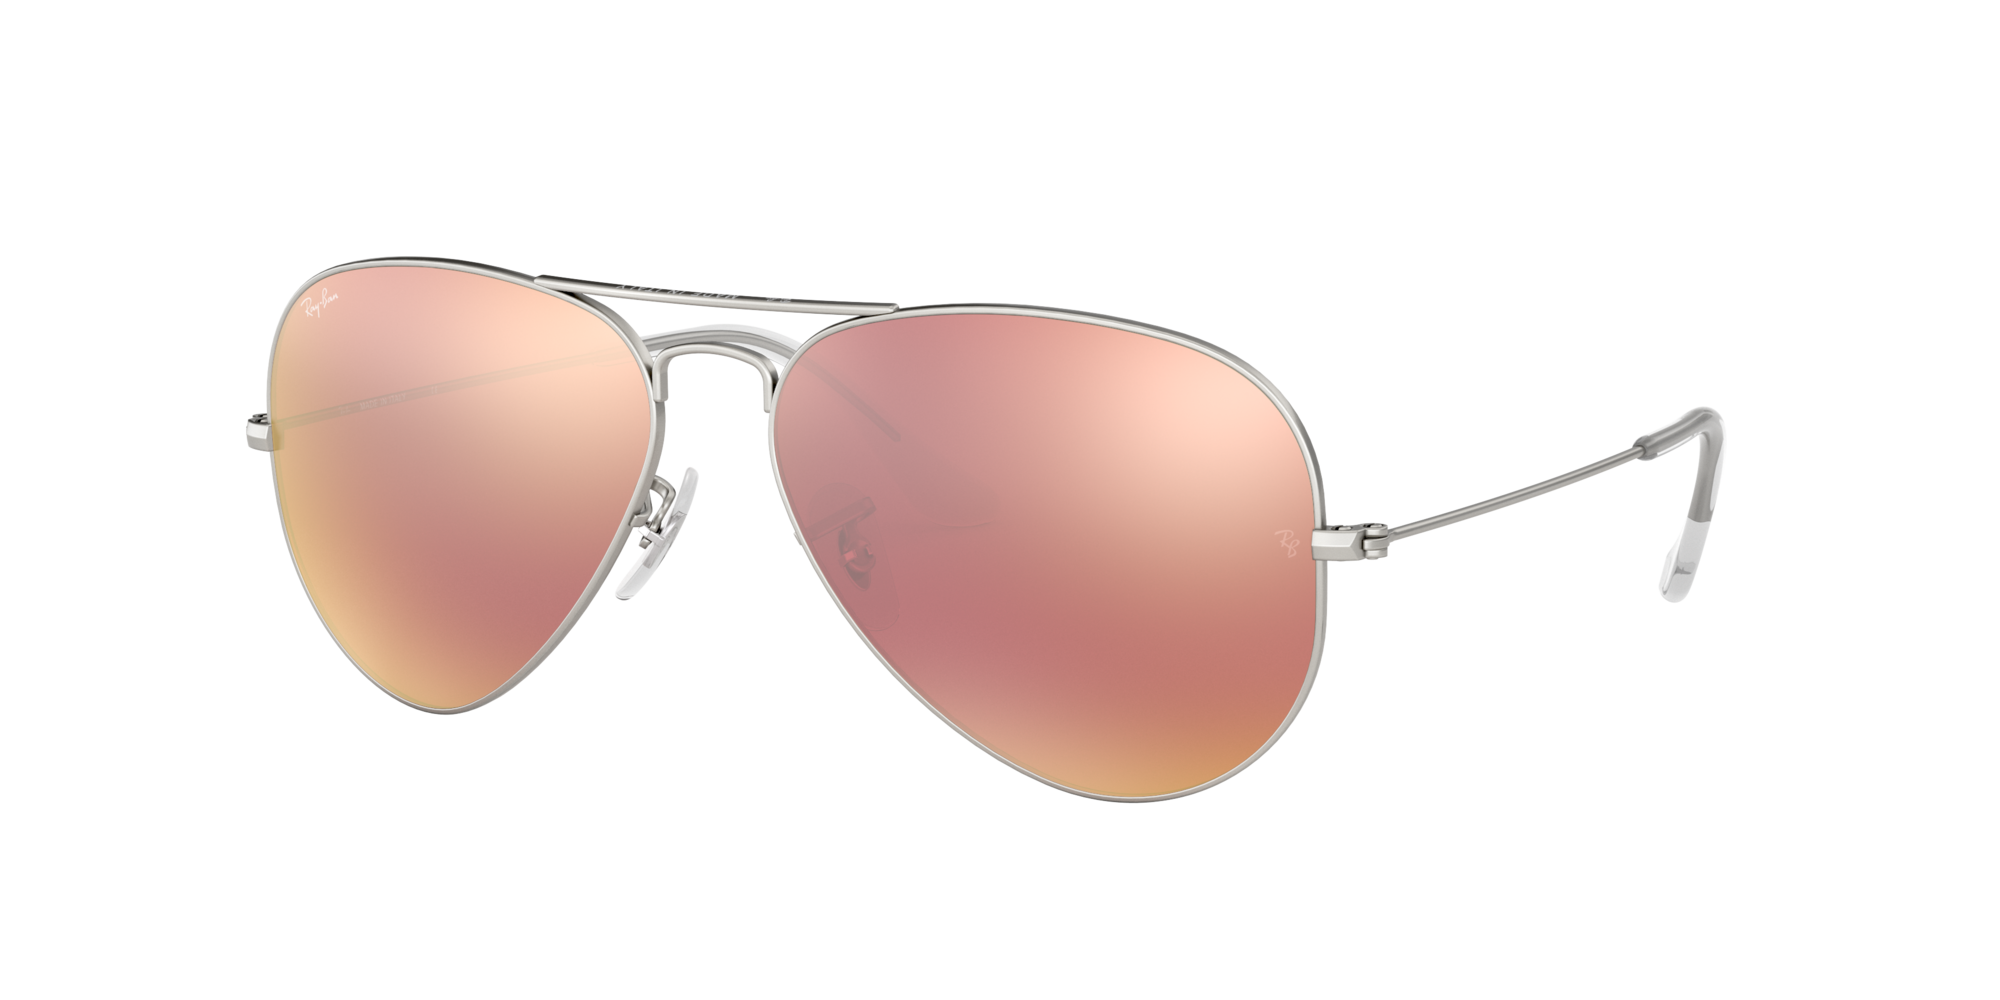 what are ray ban flash lenses